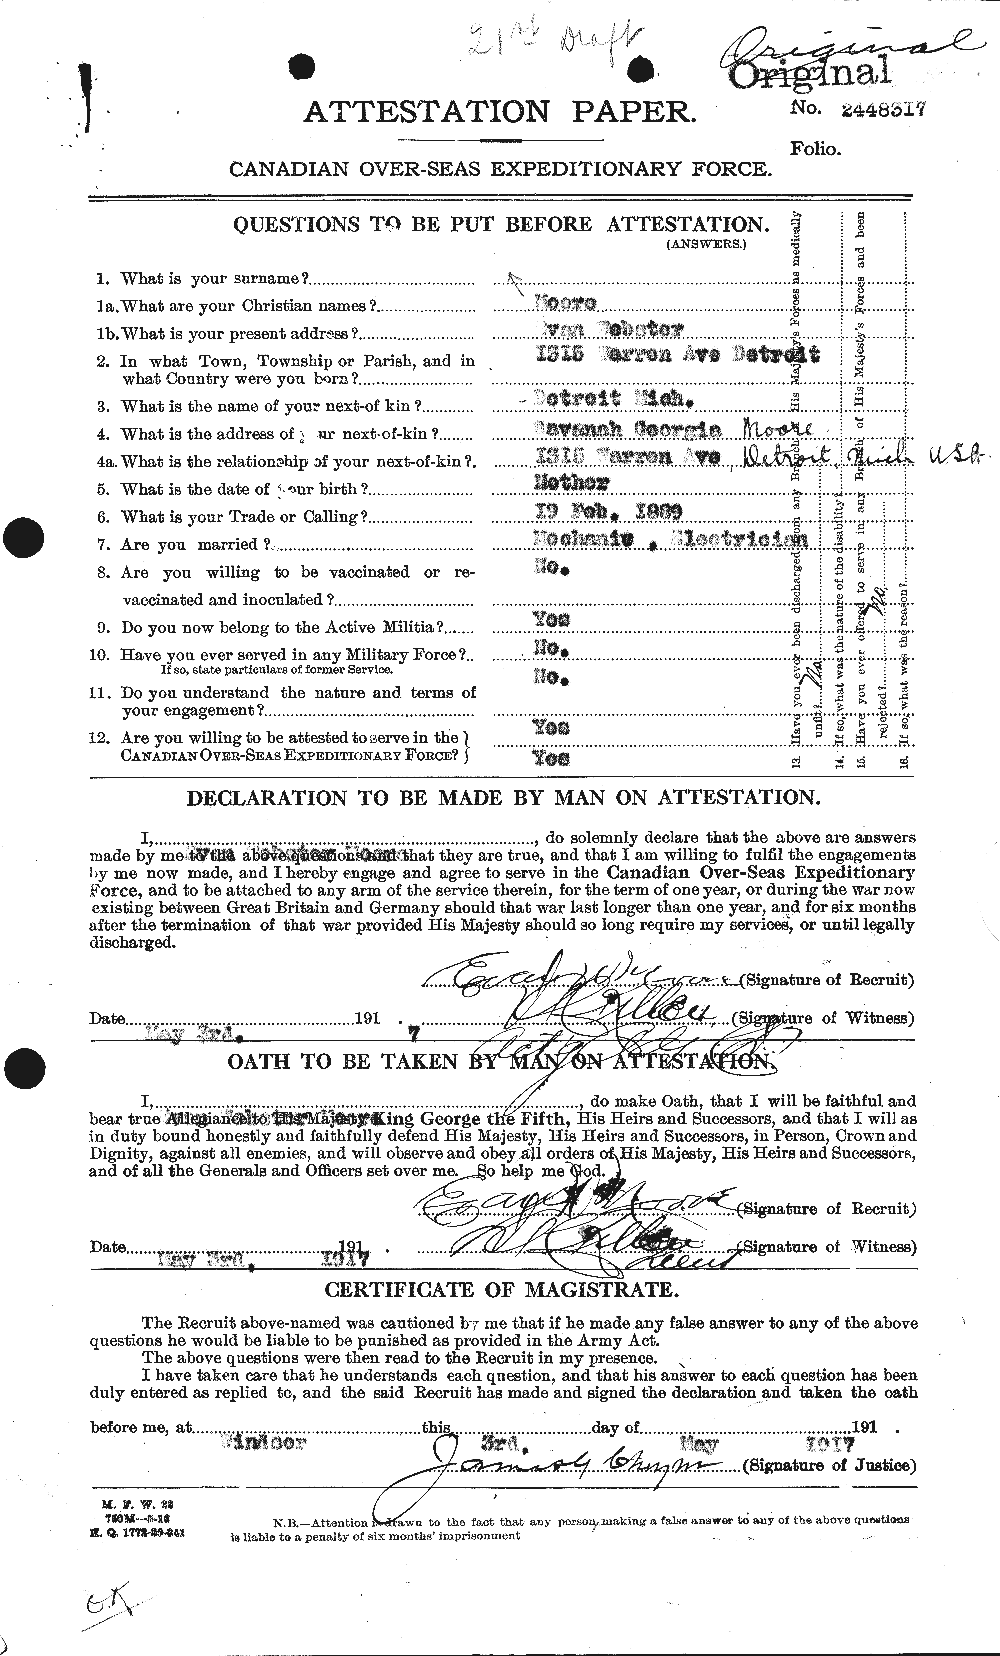 Personnel Records of the First World War - CEF 506677a